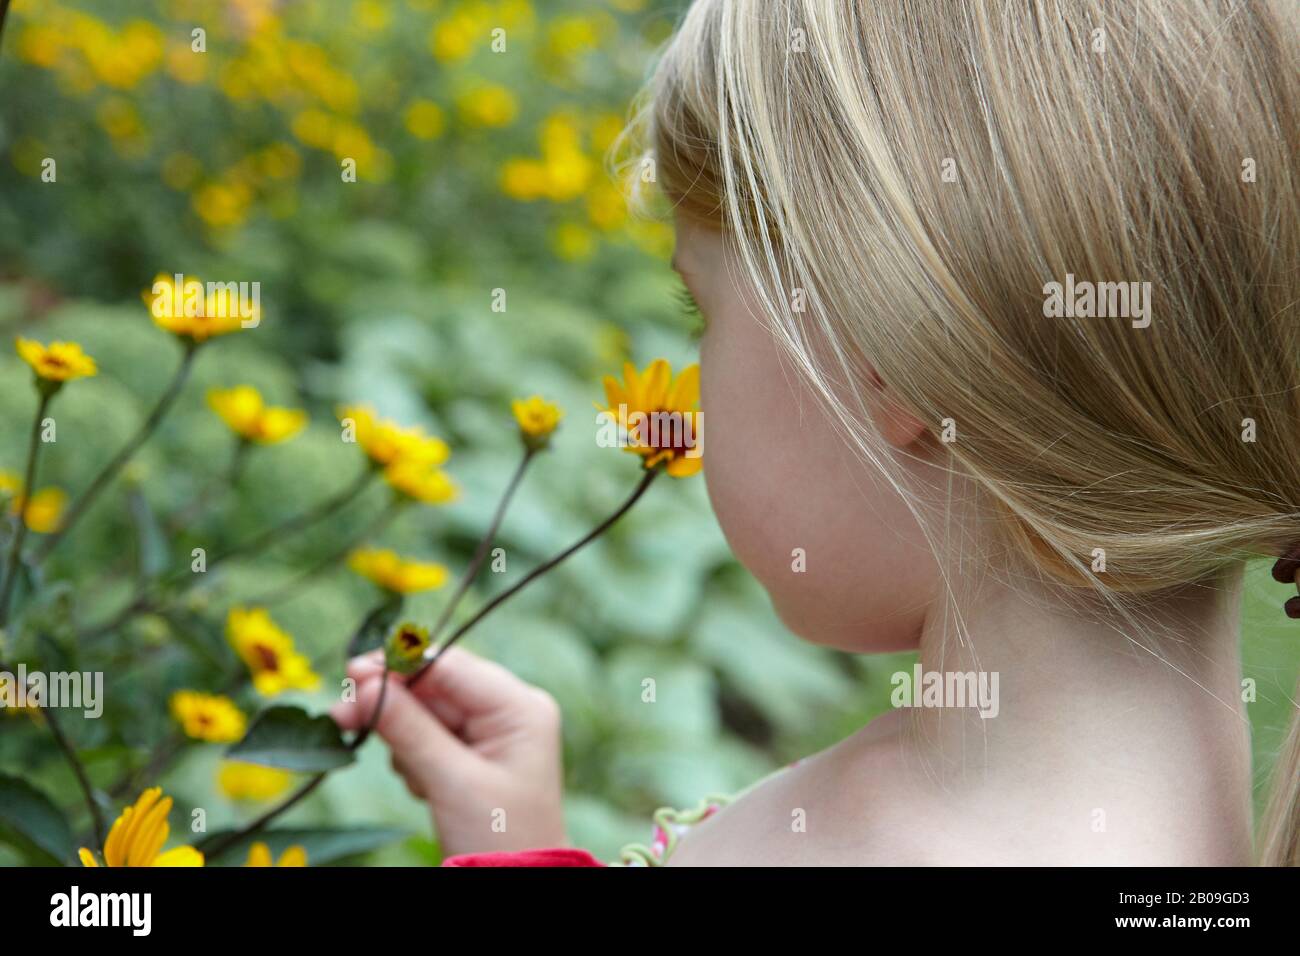 3 year old girl with blond hair reaching for flower, smelling flower Stock Photo